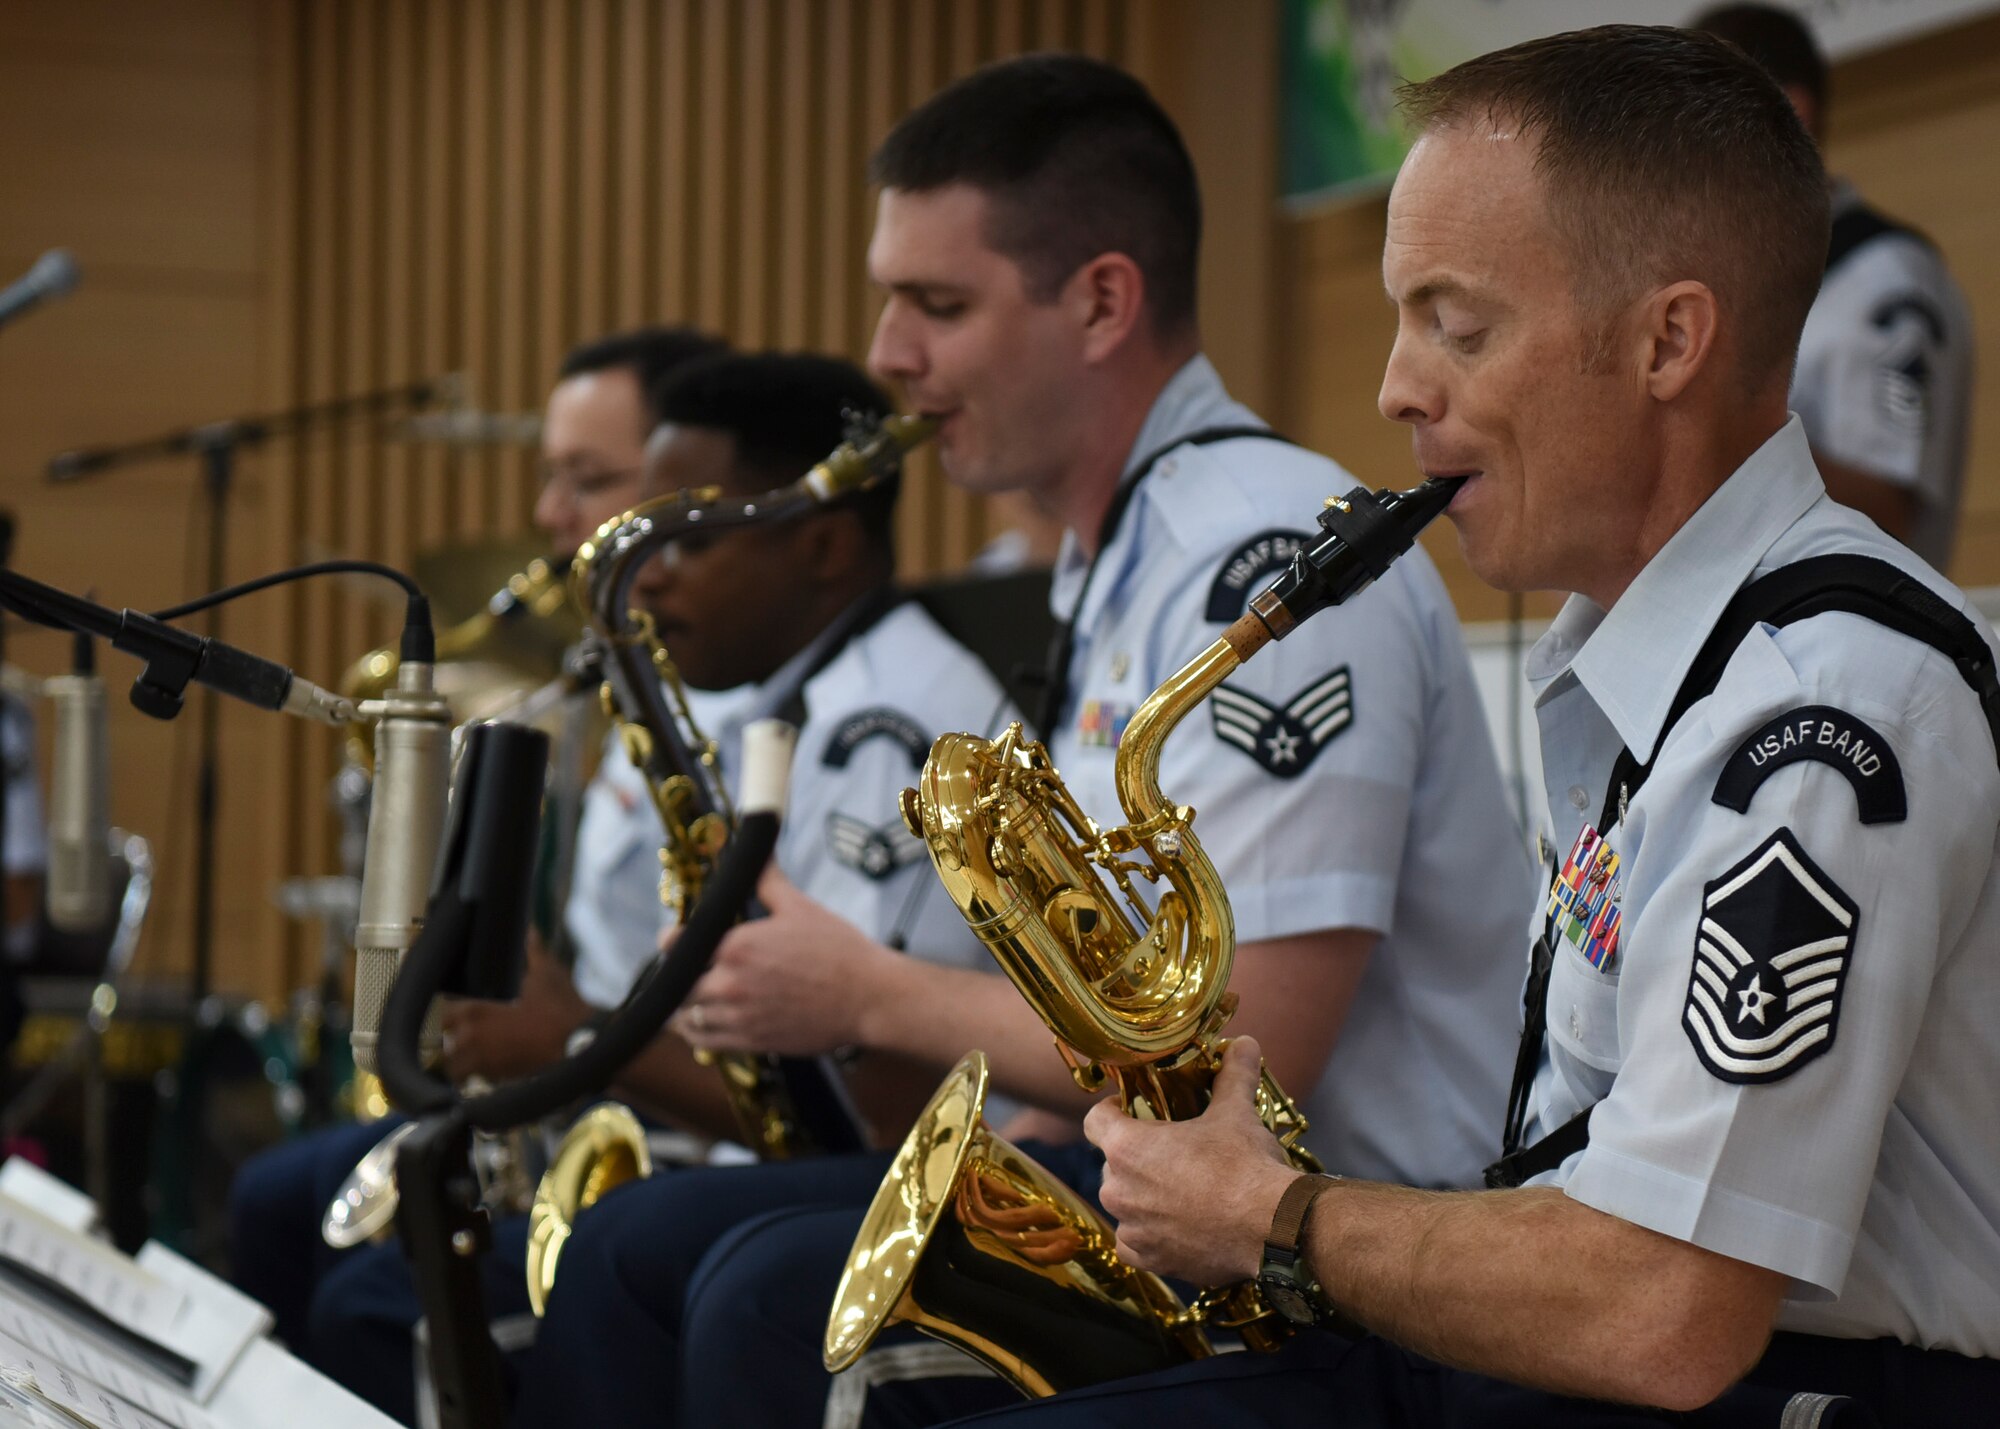 U.S. Air Force Band of the Pacific members play for the Gunsan Korean National Police in Gunsan City, Republic of Korea, Sept. 24, 2019. The Pacific Showcase jazz ensemble performed in front of a crowd of 130 officers and their families. (U.S. Air Force photo by Staff Sgt. Anthony Hetlage